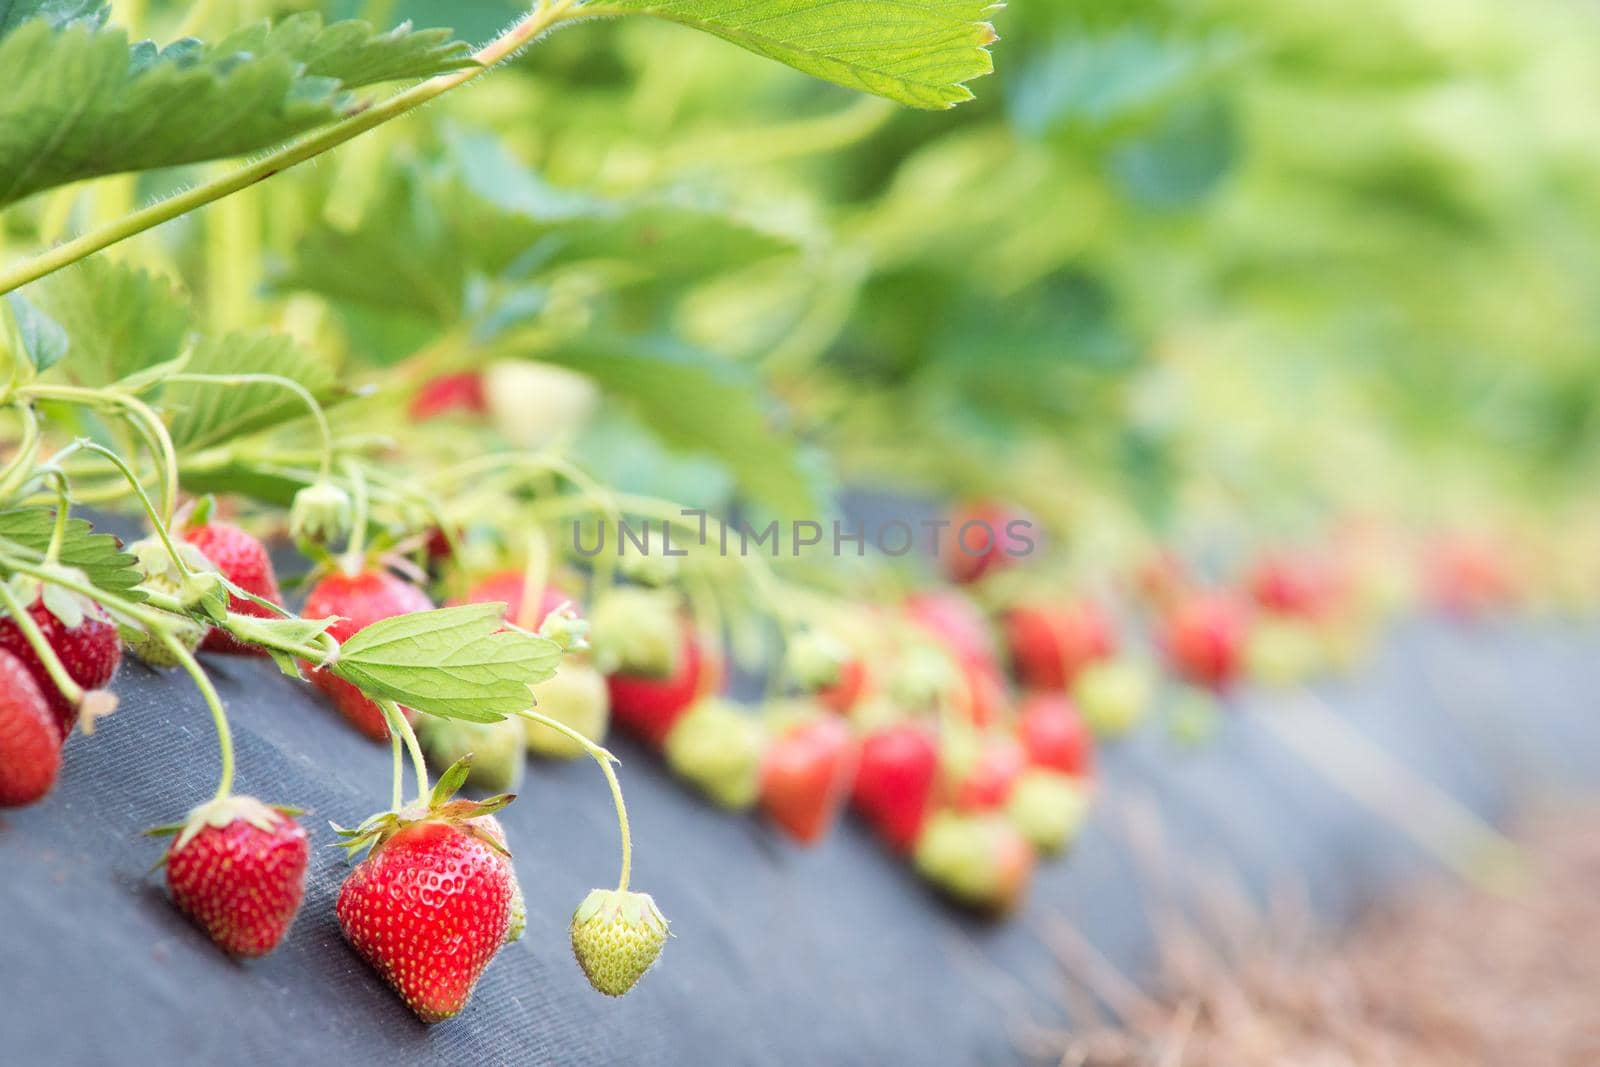 Industrial growing of strawberries on farm in countryside